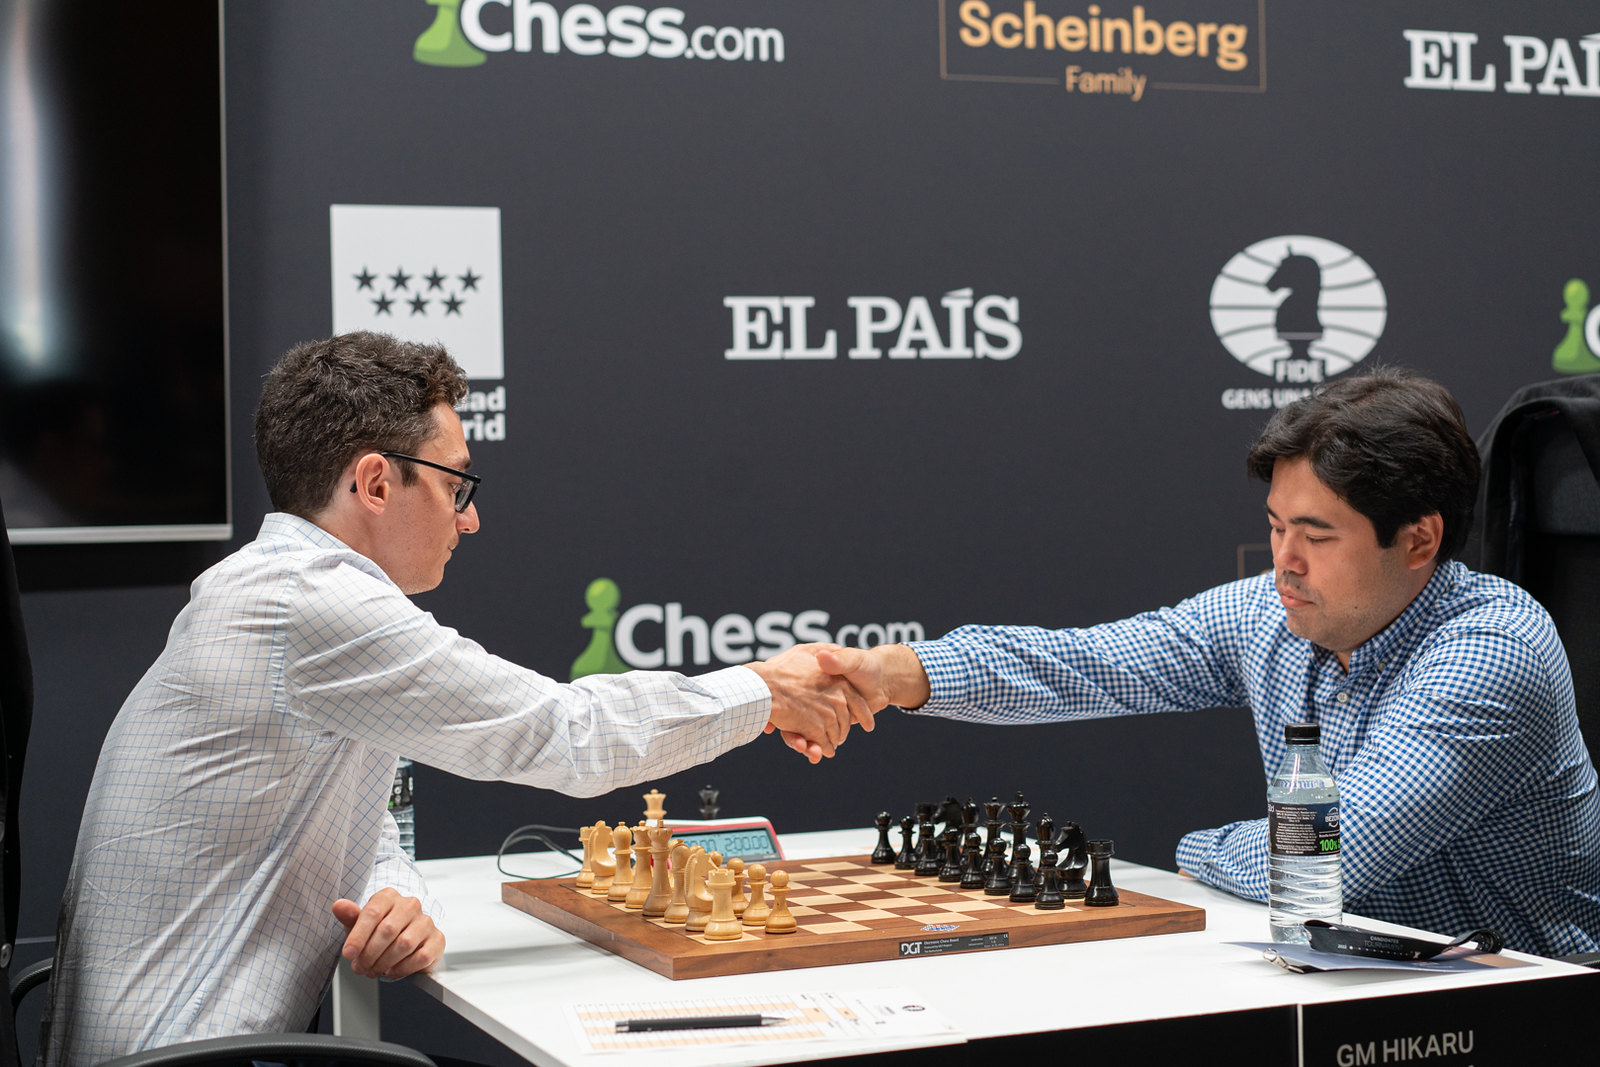 Confident Carlsen Equalizes Easily In FIDE World Chess